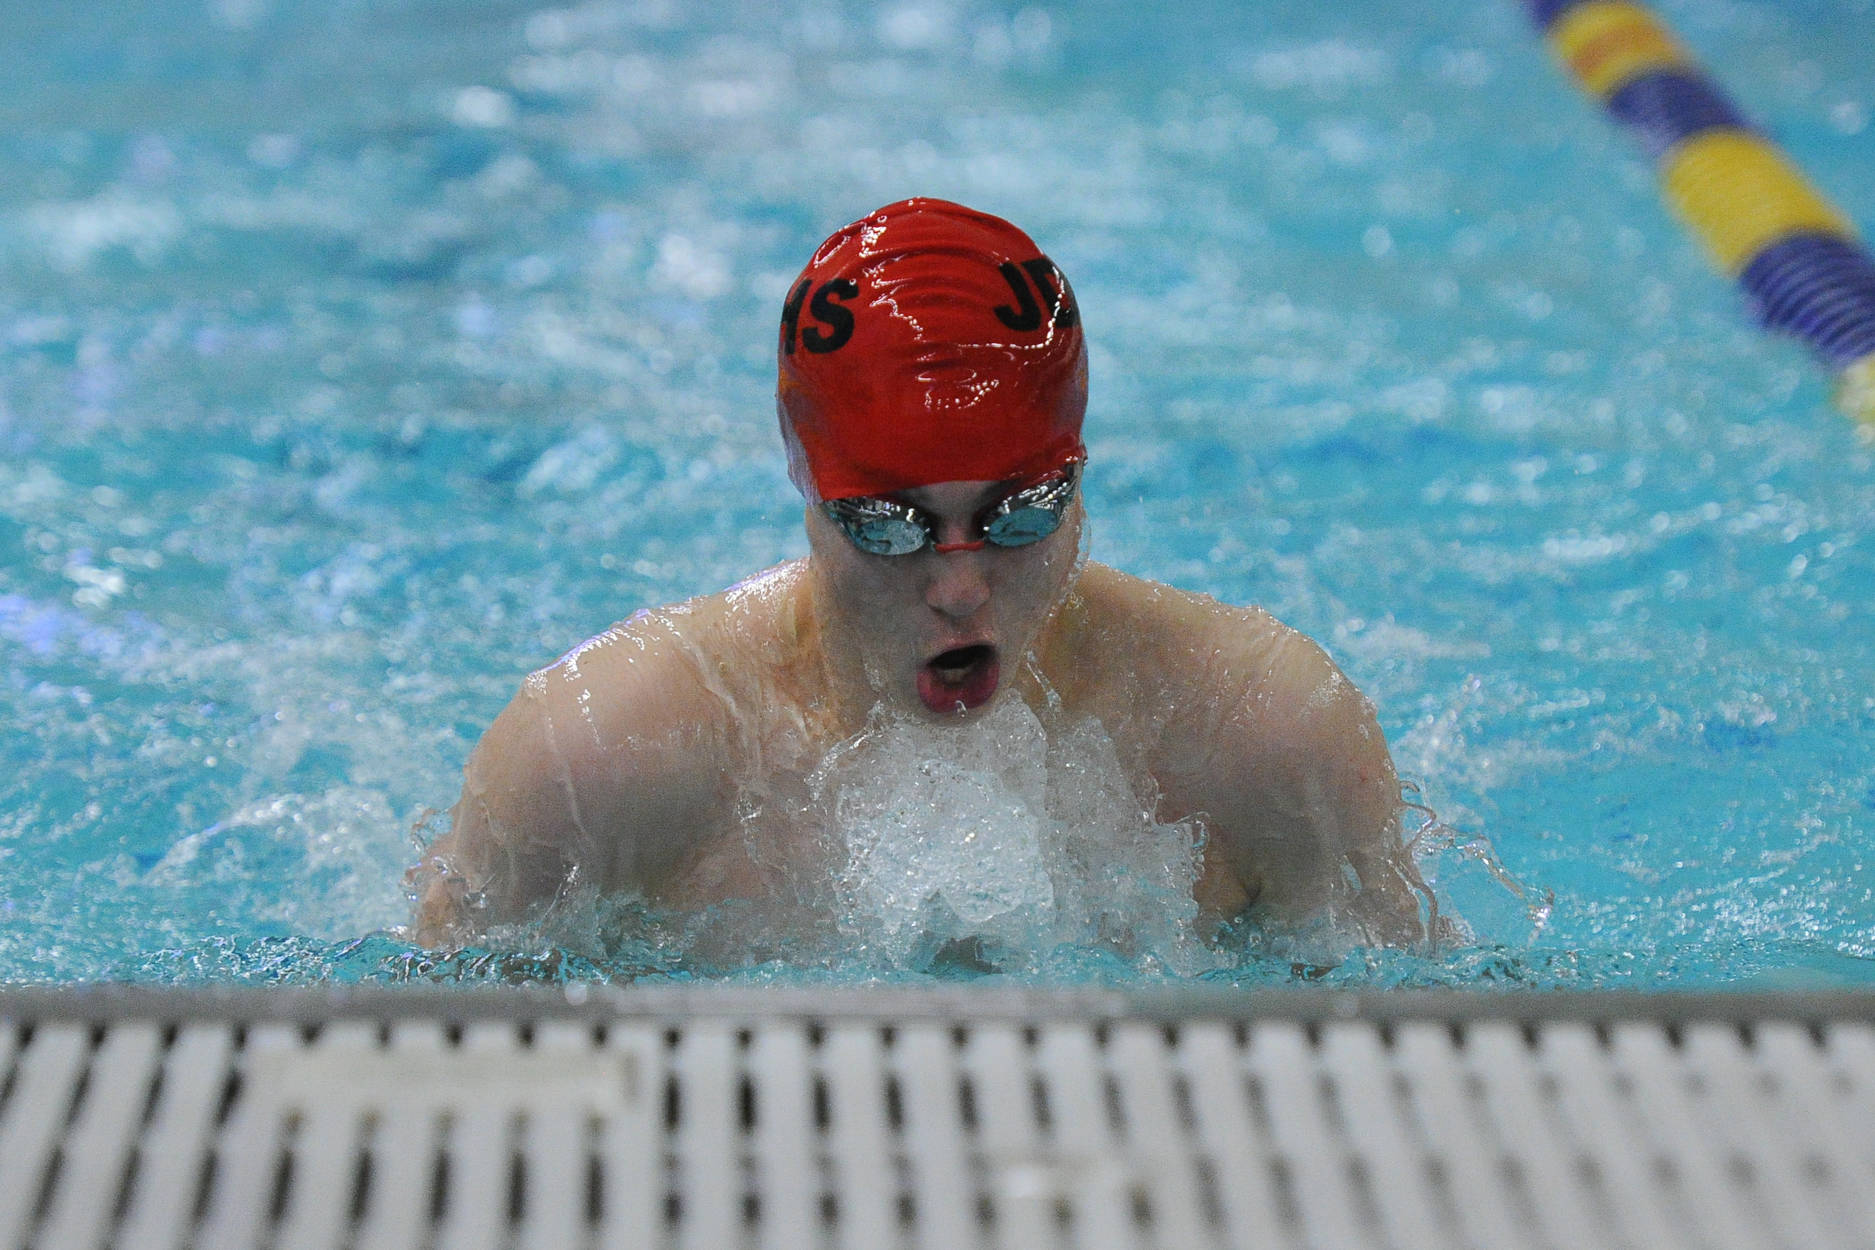 Juneau-Douglas High School senior Tyler Weldon swims in the finals of the 100-yard breaststroke. He finished in sixth place with a time of 1:02.66. (Michael Dinneen | For the Juneau Empire)